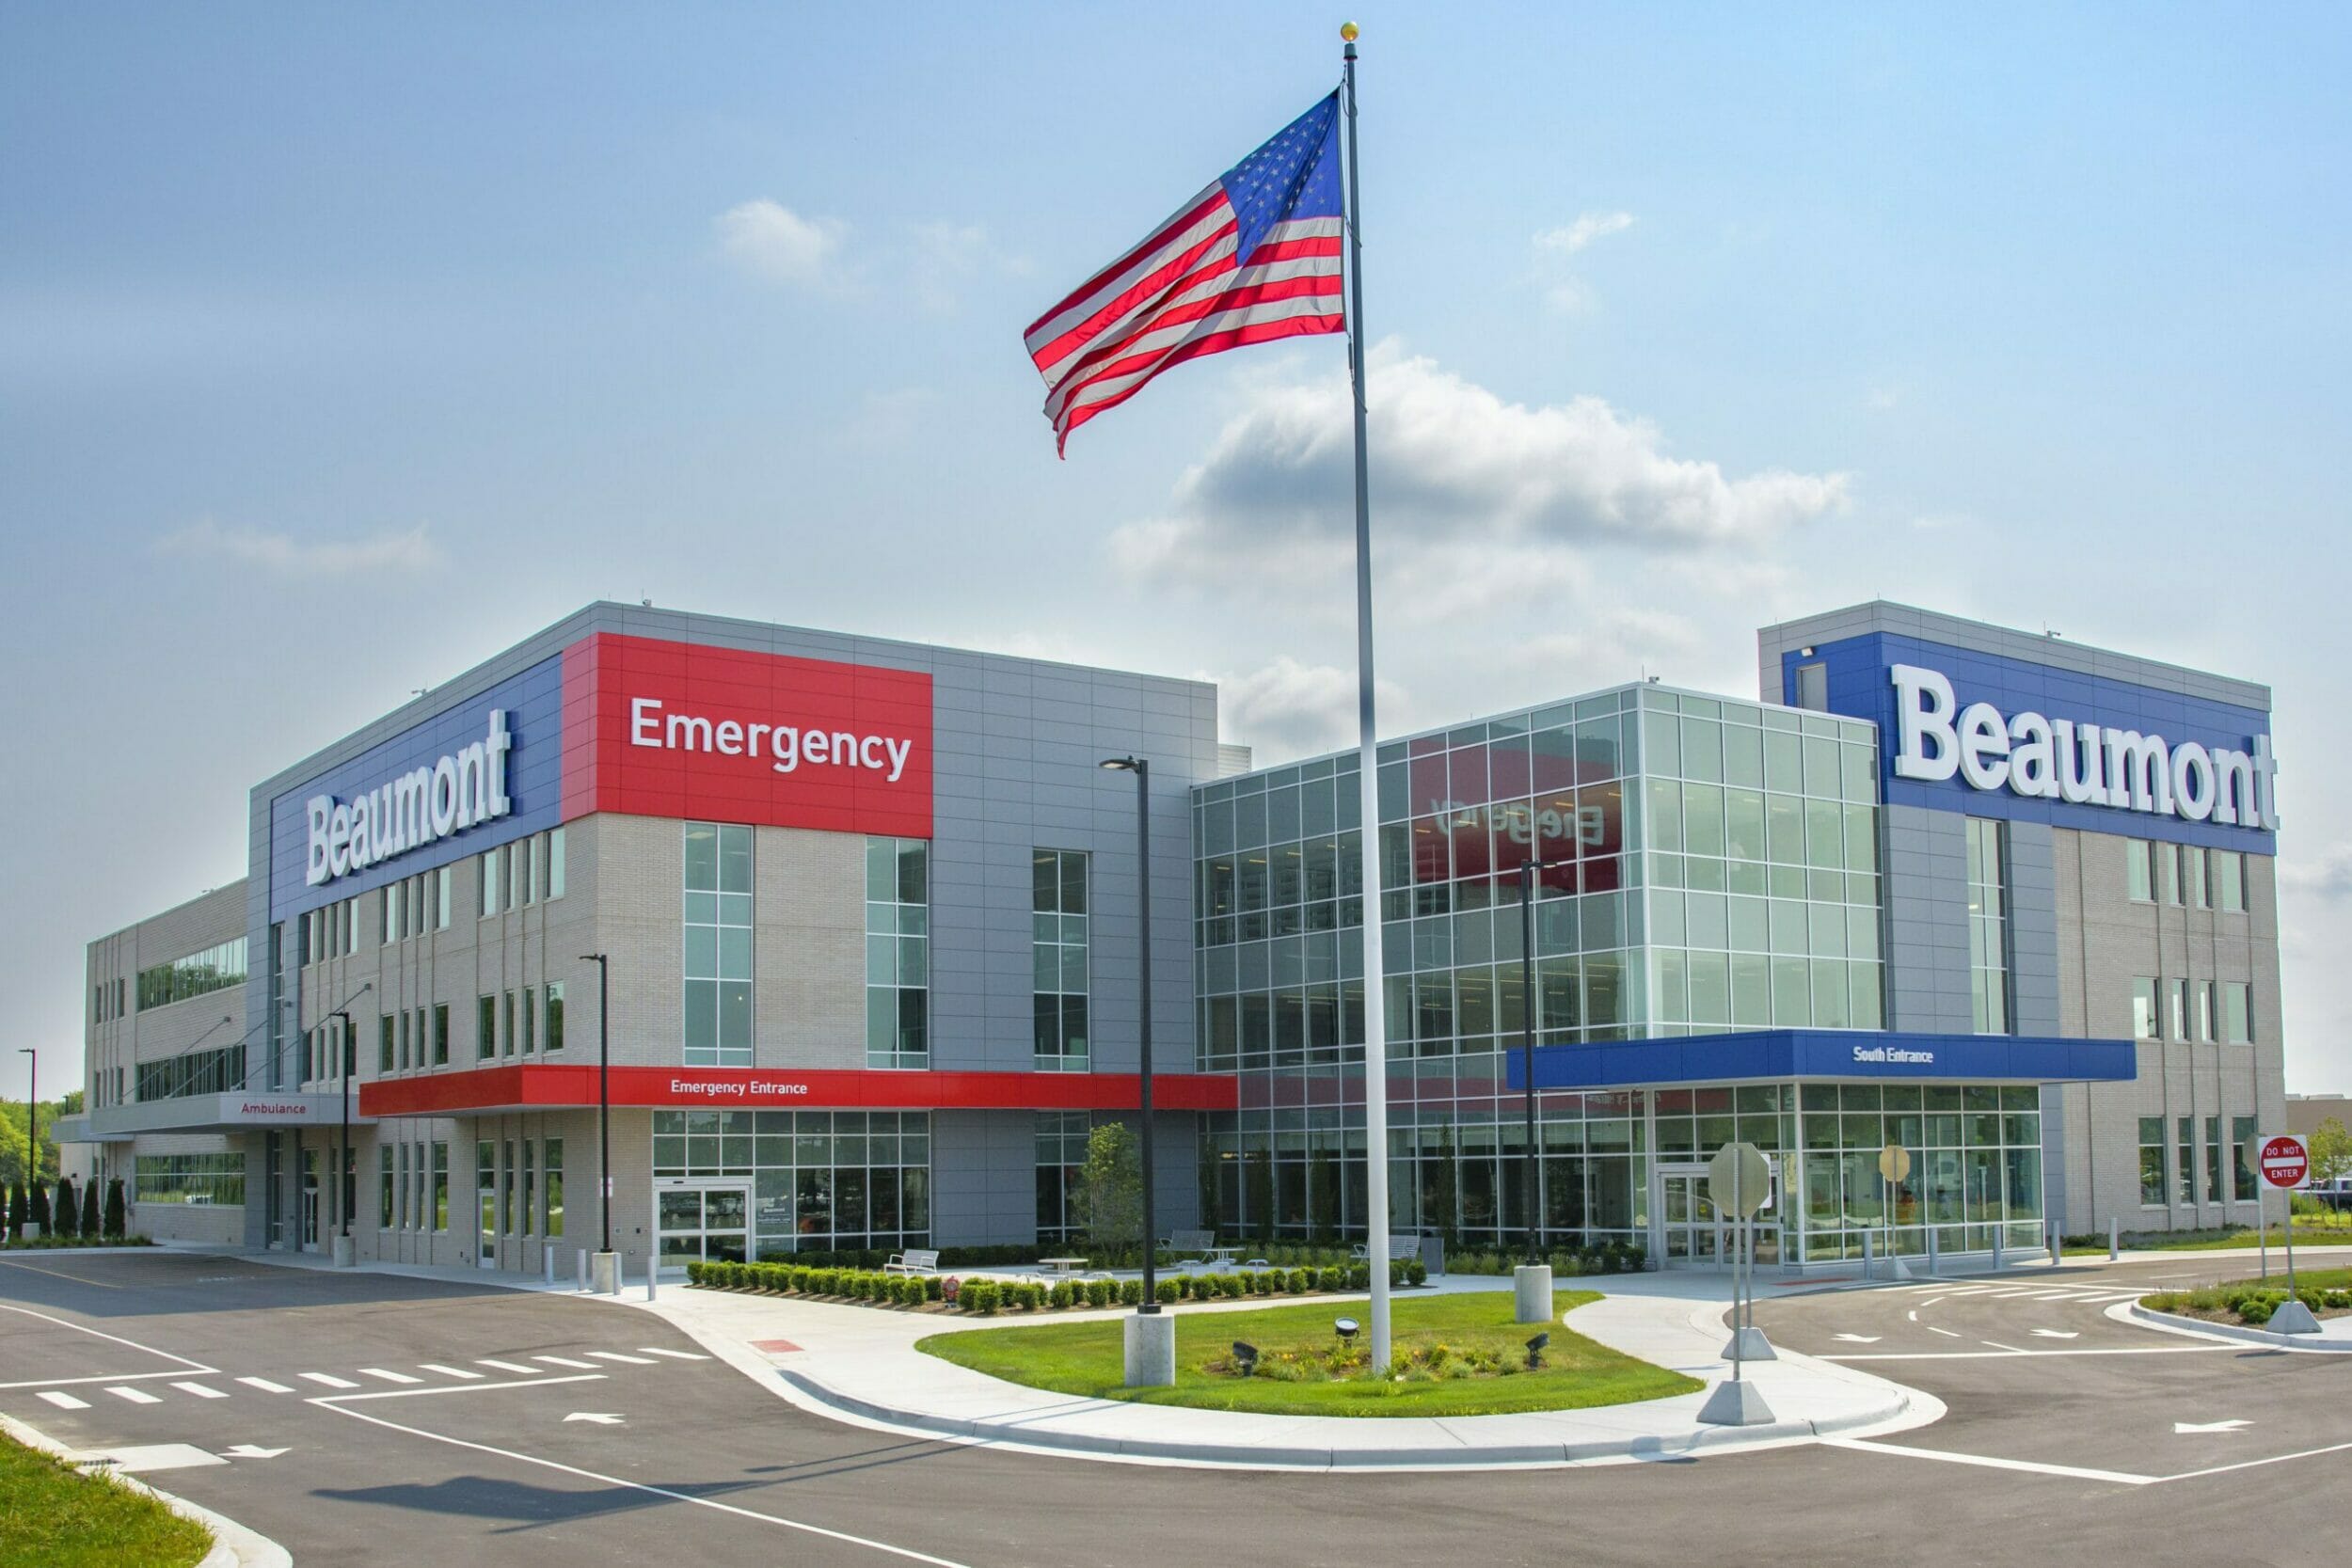 Exterior street view of Beaumont medical center Livonia with a gray exterior, red emergency entrance and blue background feature on building with large, white letters that spells Beaumont